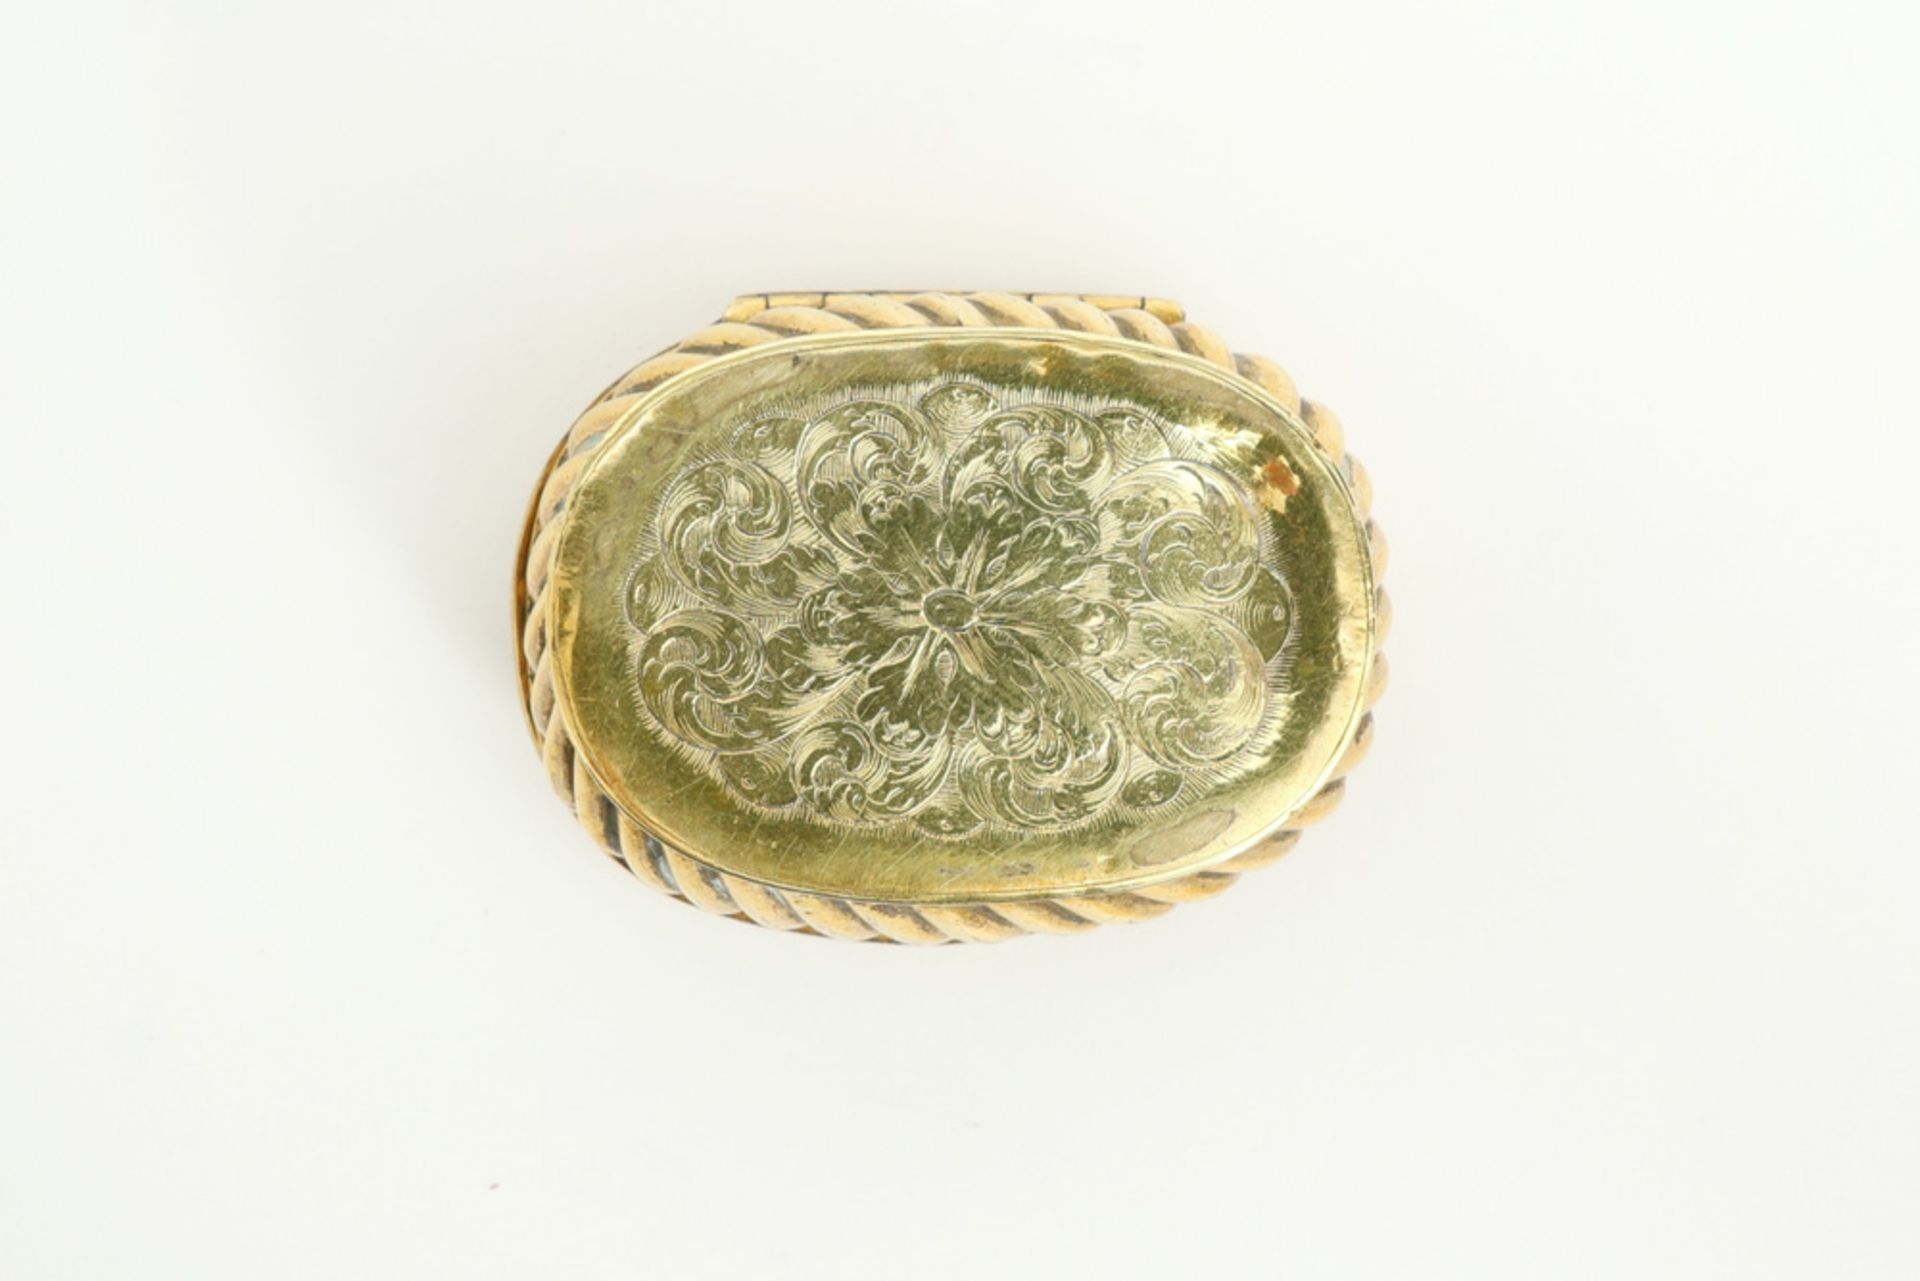 17th Cent. presumably German oval snuff box in vermeil with engraved and embossed ornamentation and  - Image 4 of 4